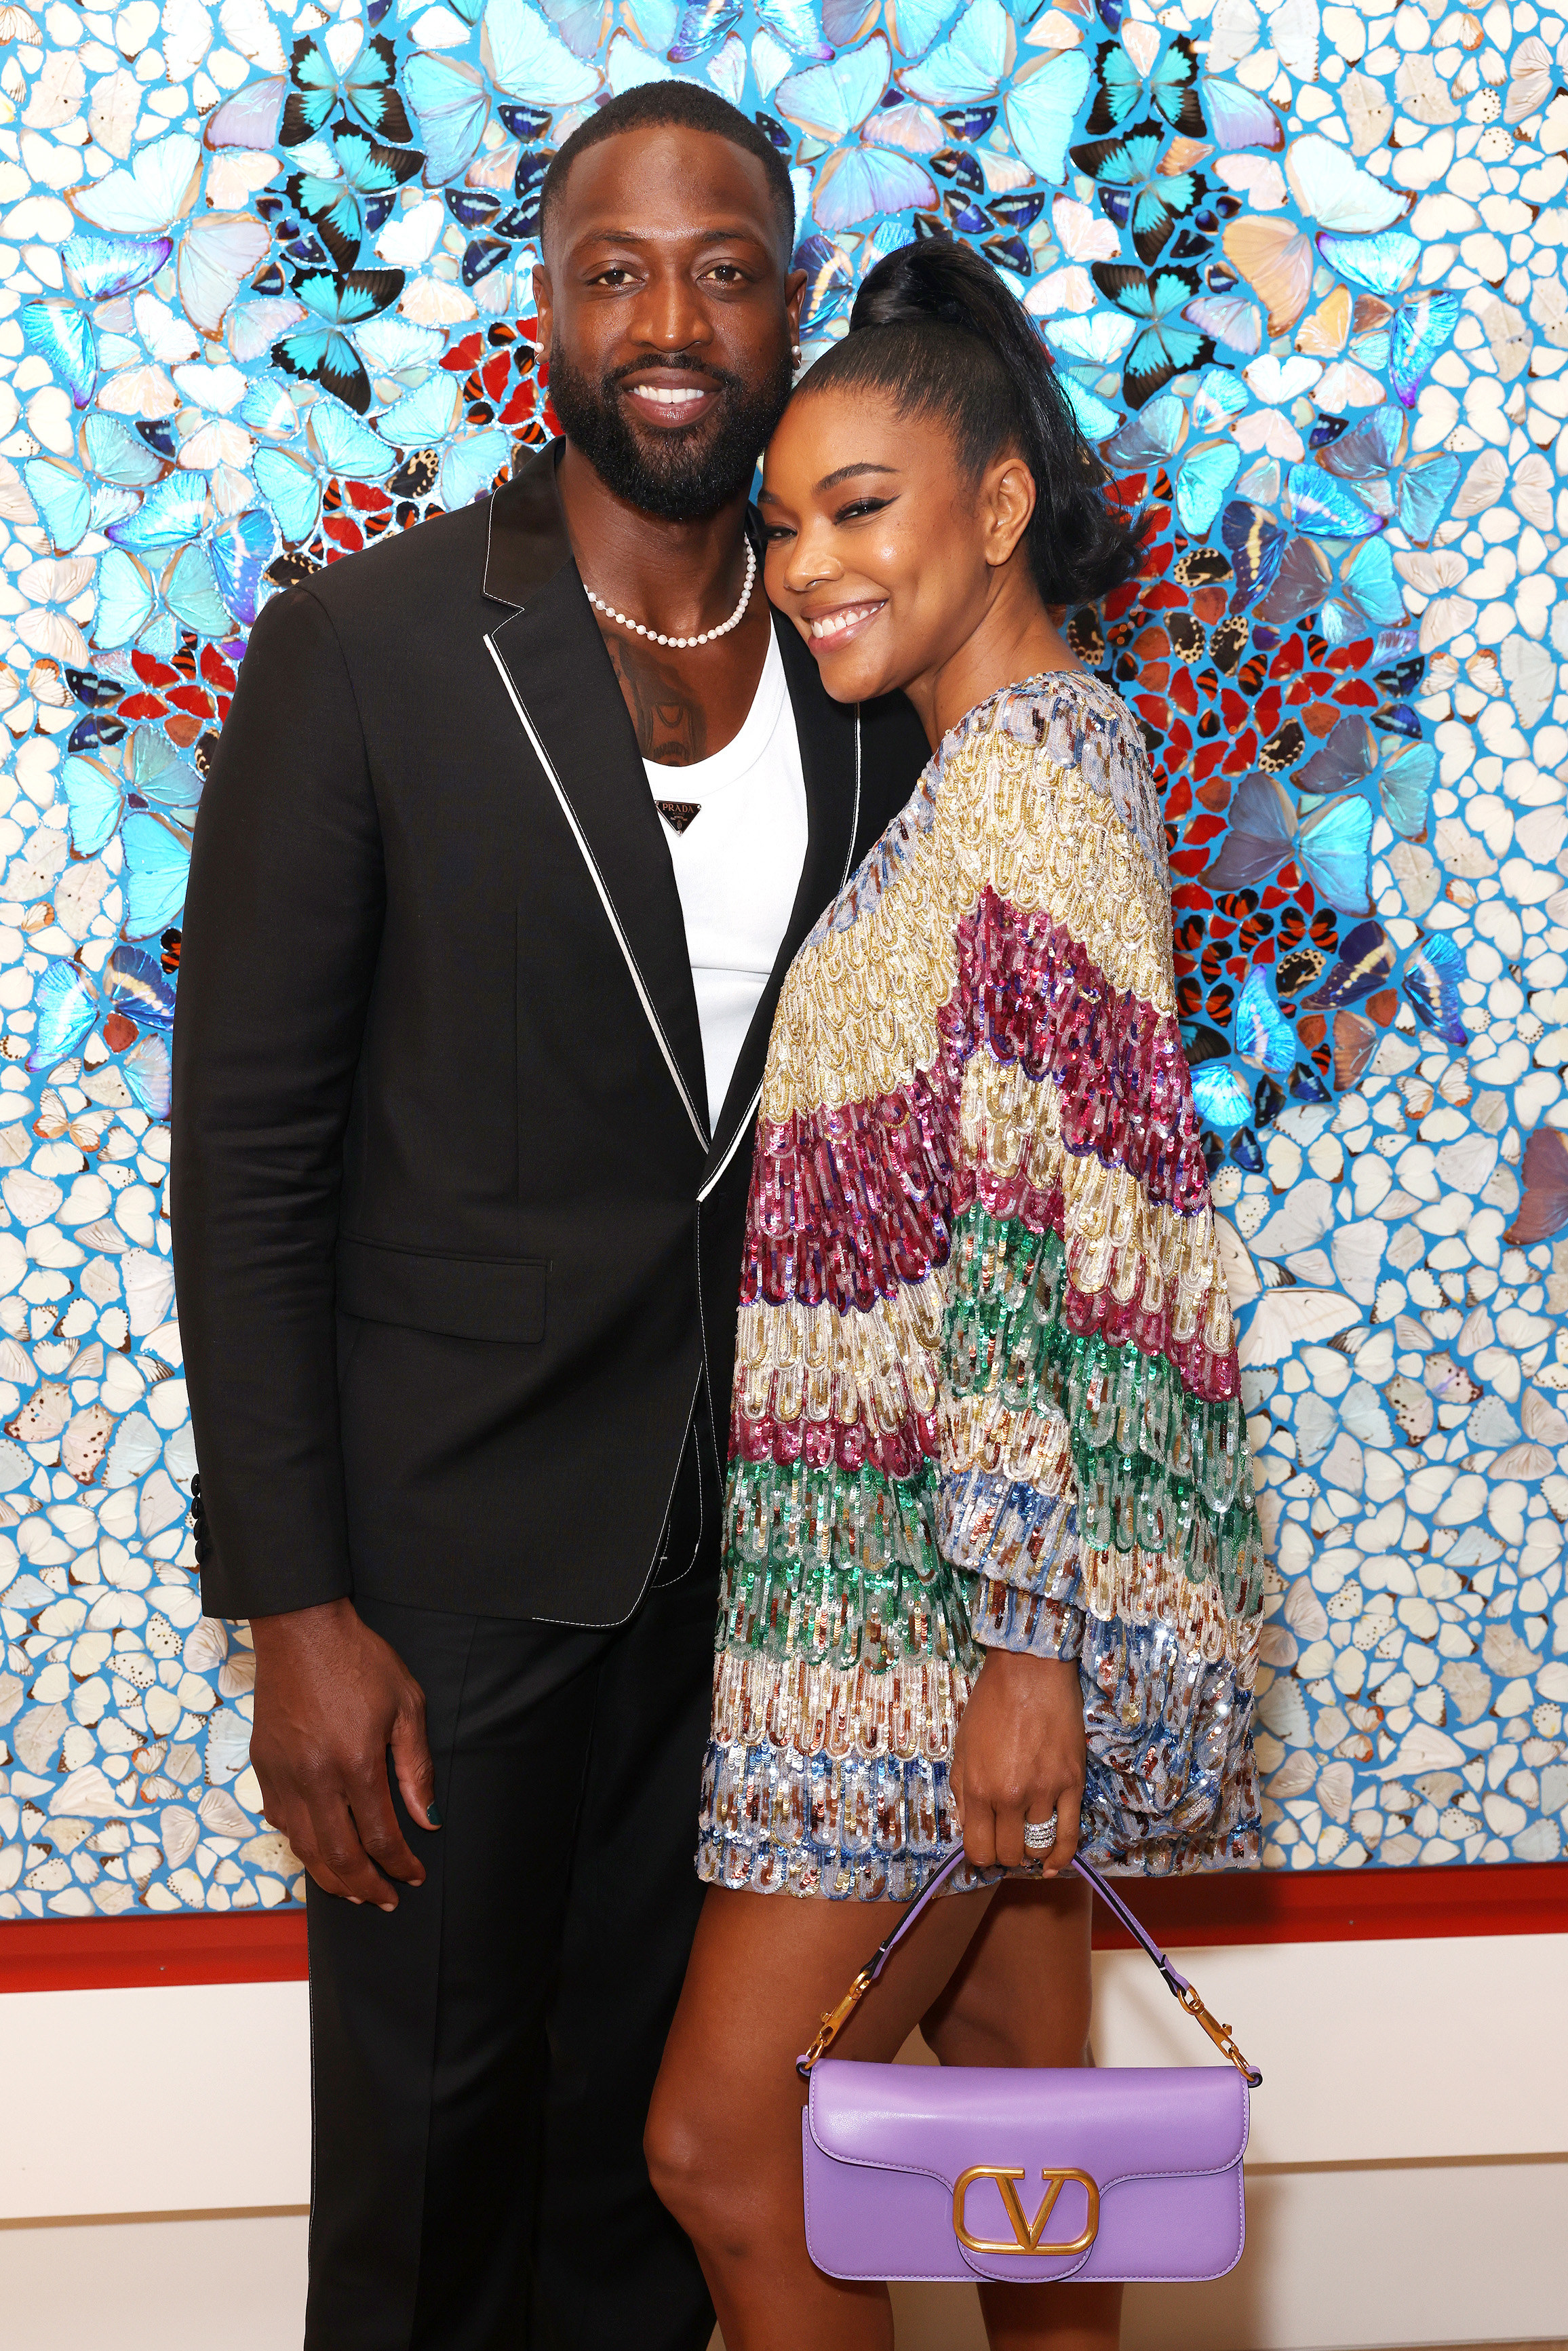 Dwayne Wade and Gabrielle Union on the red carpet